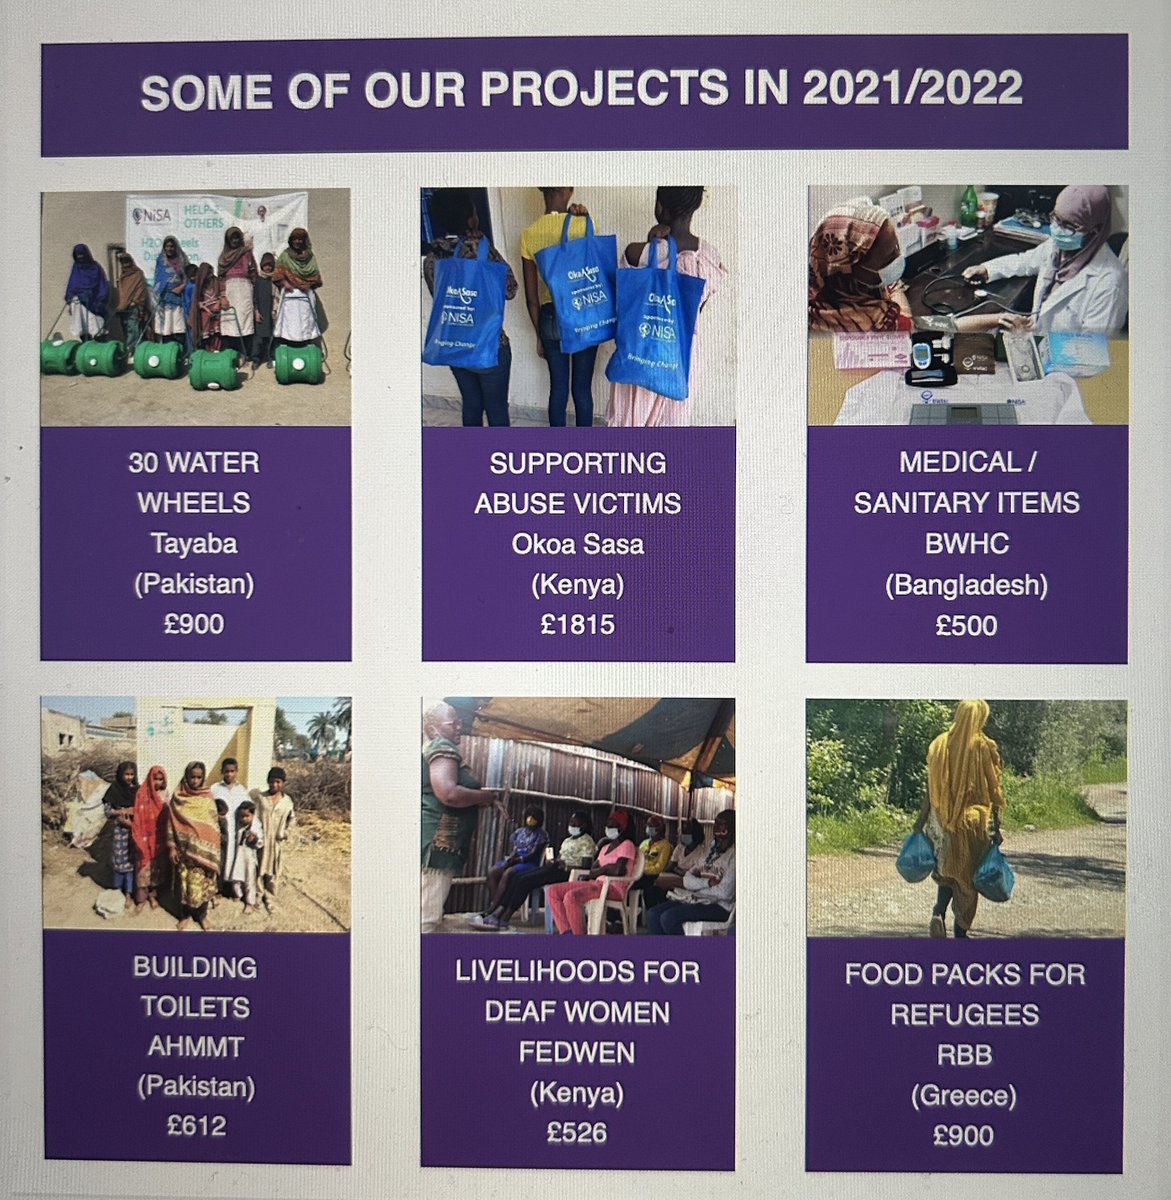 I need your HELP! Small donation for this appeal or sign up to £3/month! Why not do both! I run this small charity with my friends @NazminAkthar @DrIramSattar @Fozia_u - all donations spent on projects. We cover the minimal overheads ourselves or via gift aid. Here is the latest